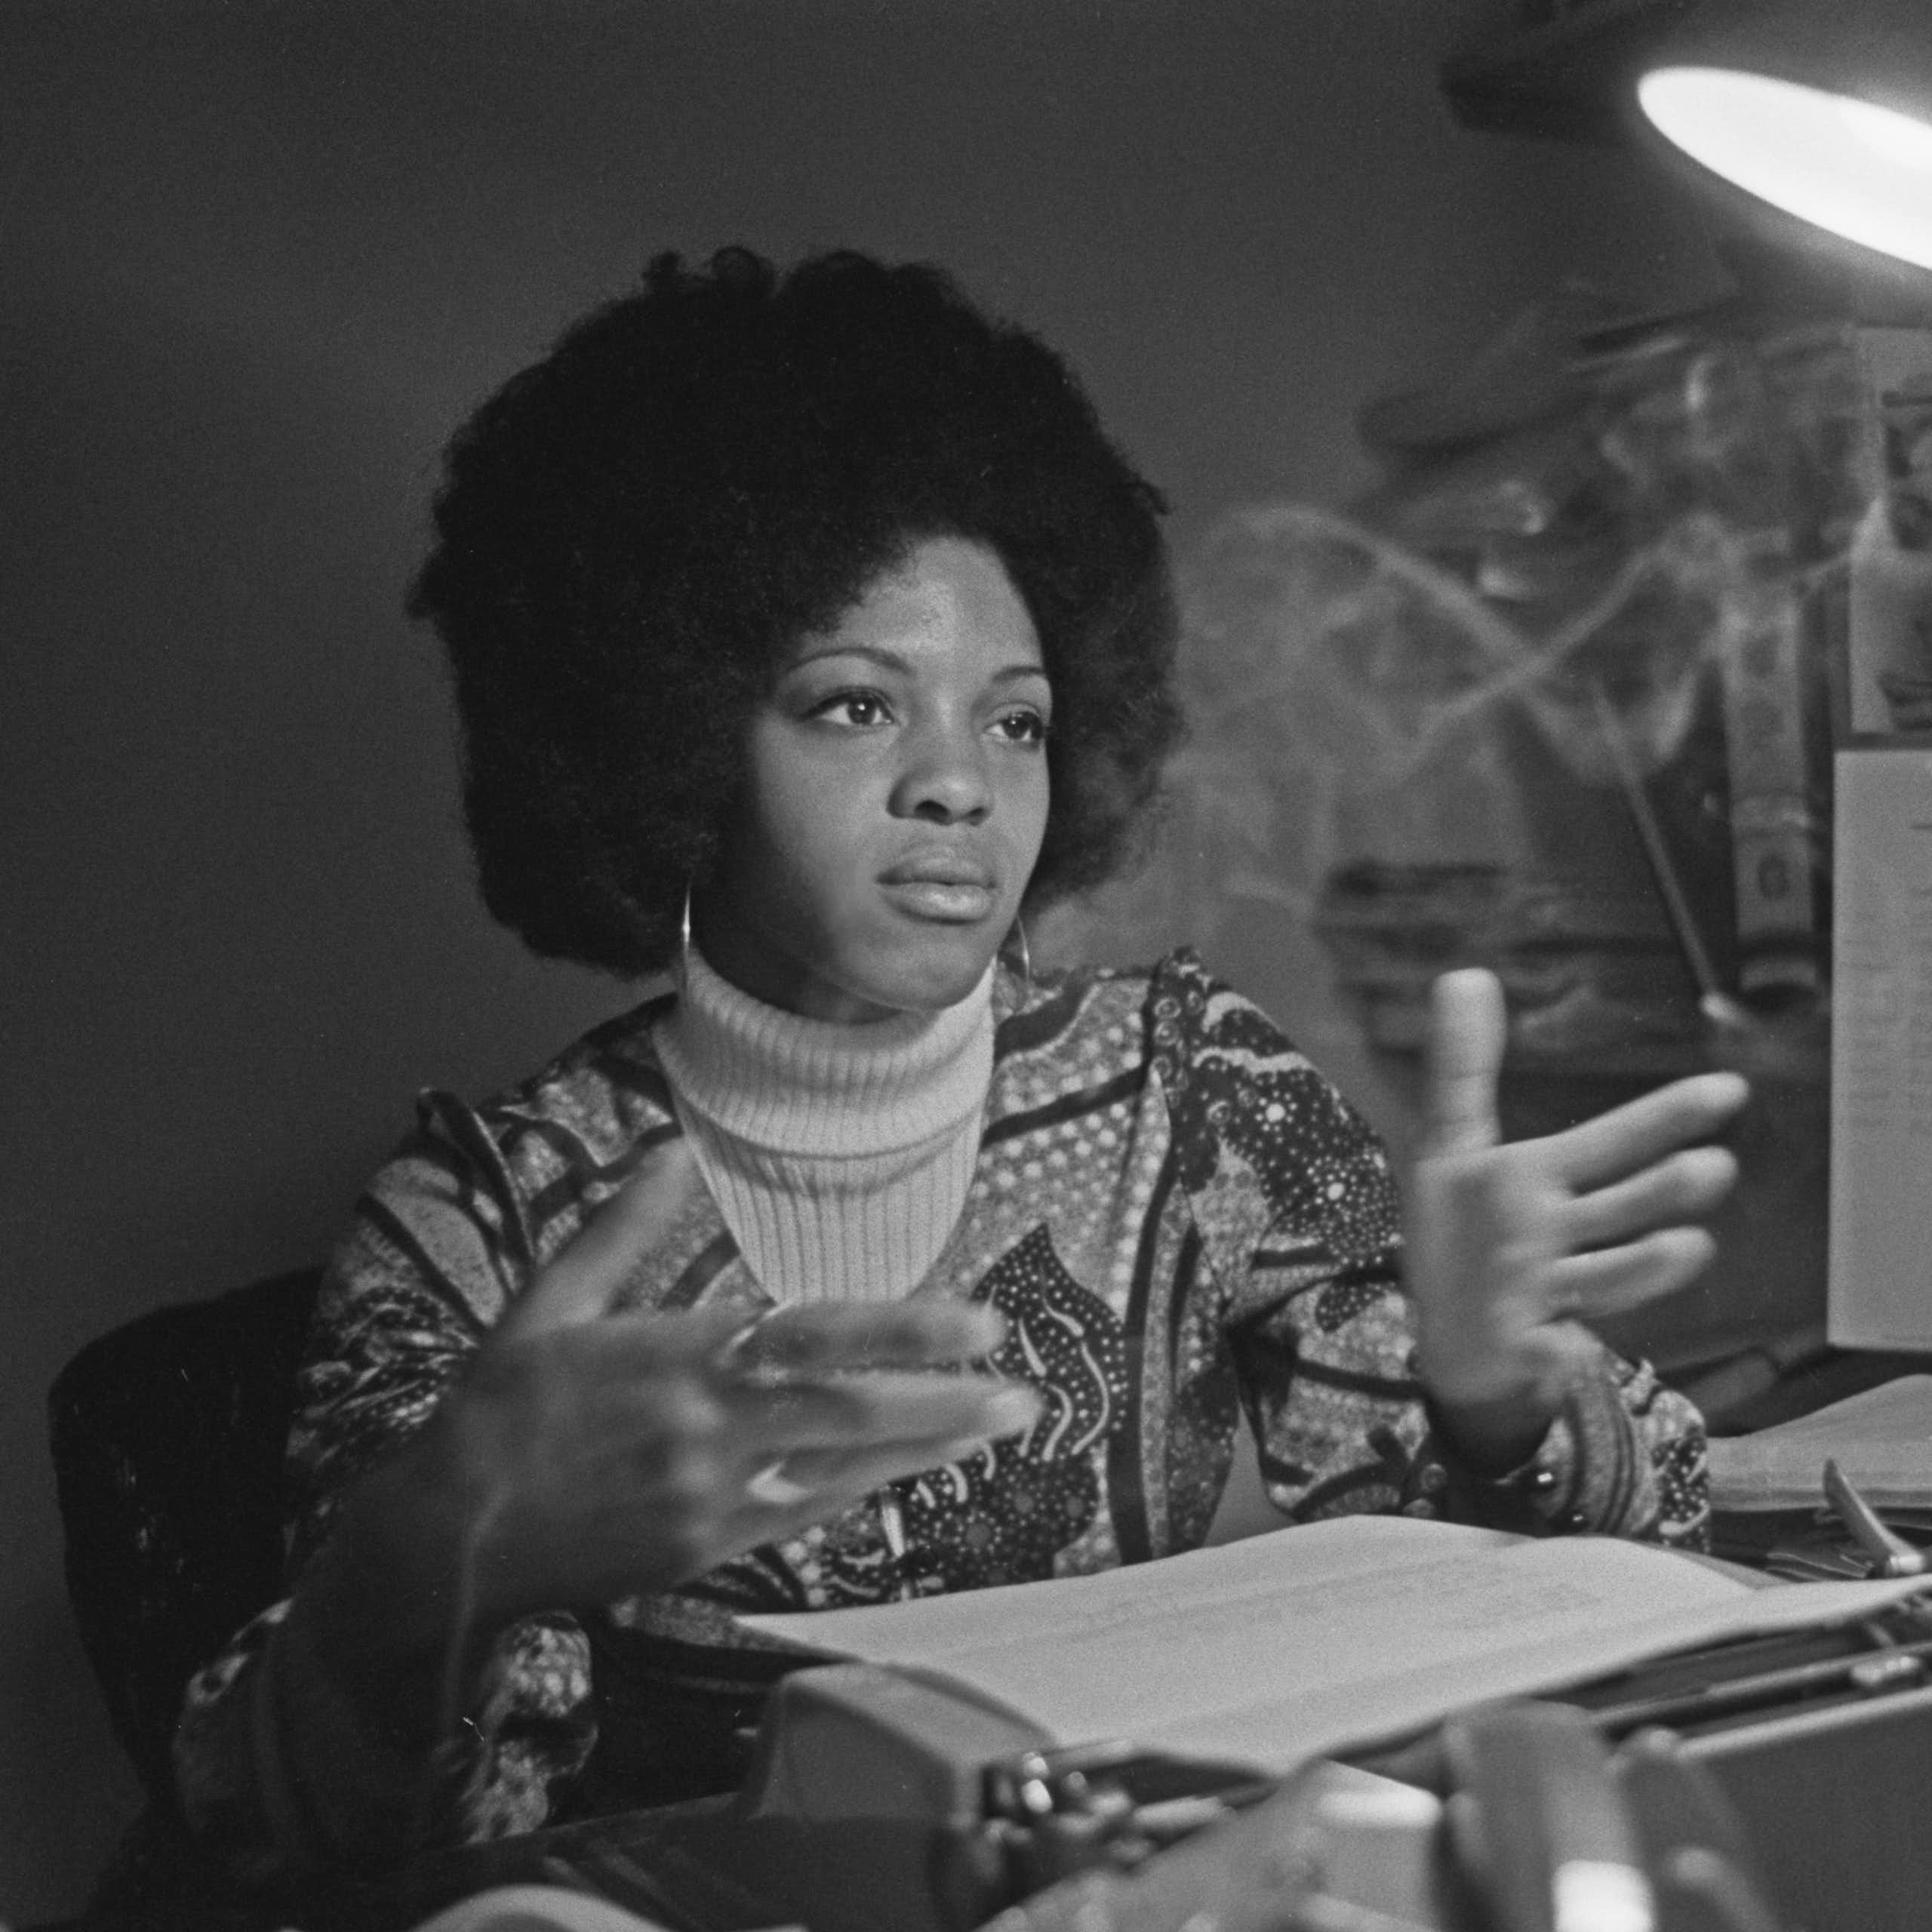 A young woman with an Afro sits at a desk piled with manuscripts, gesturing with her hands.